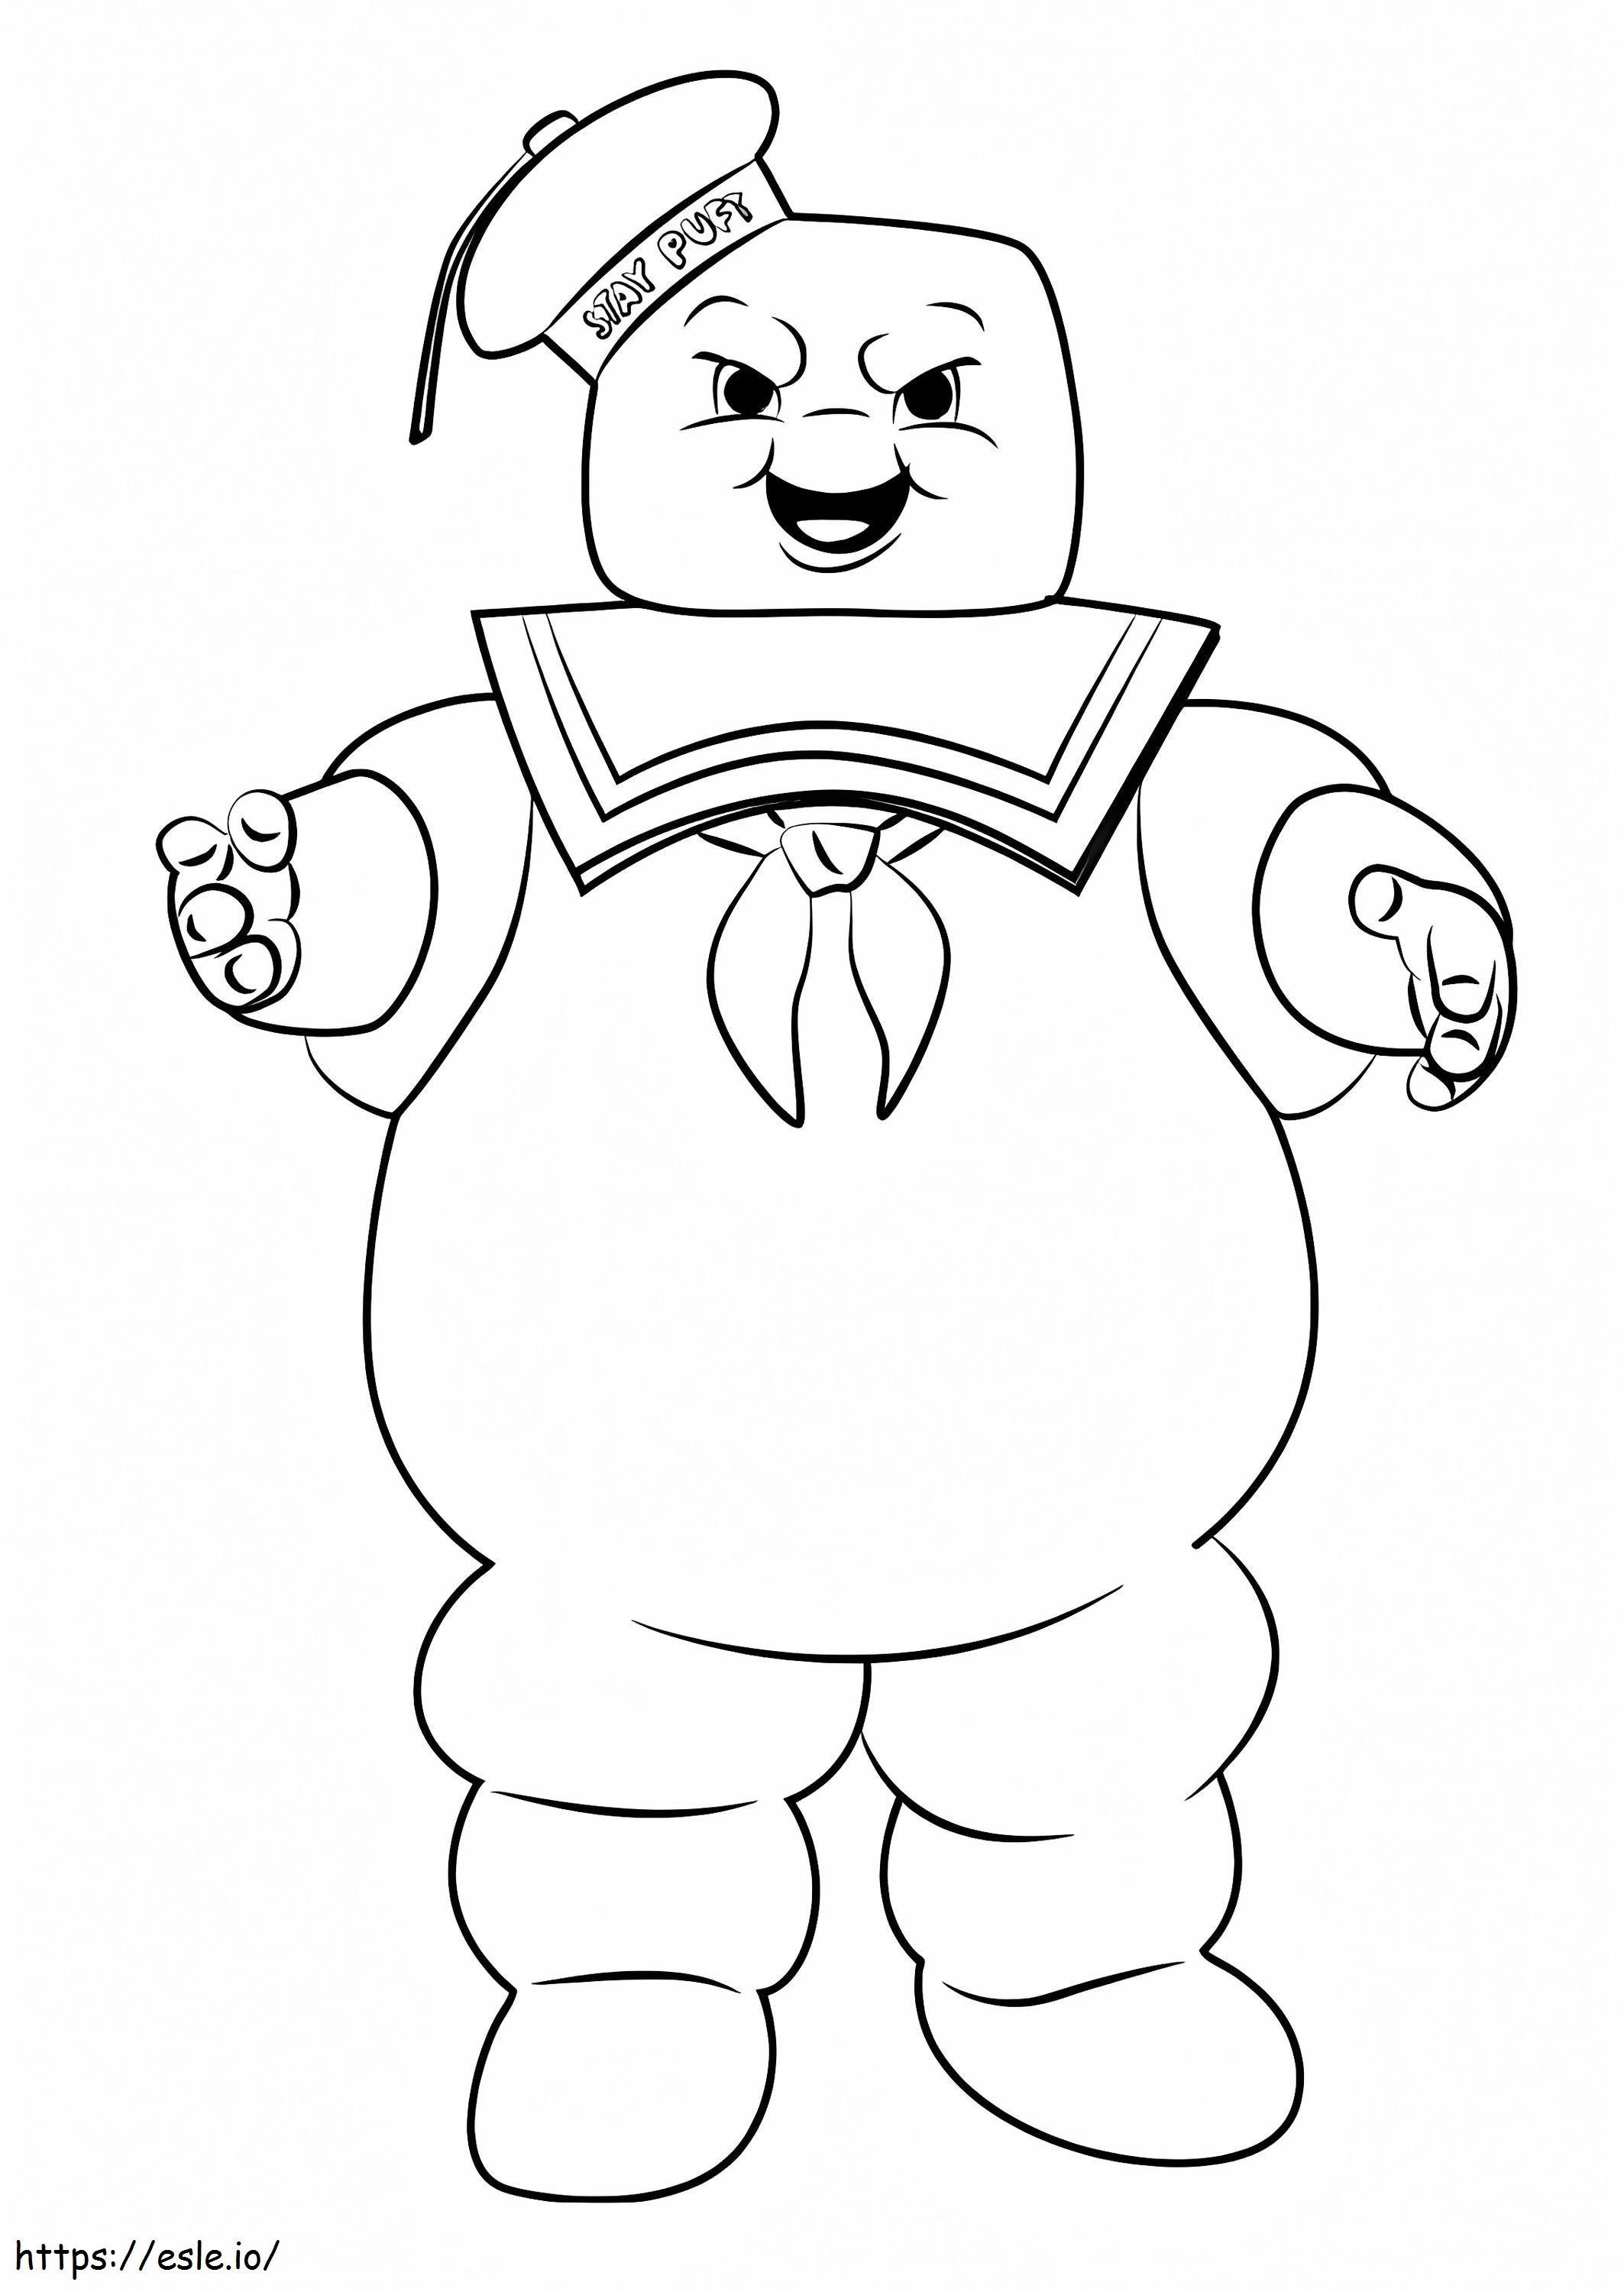 Angry Ghostbusters coloring page